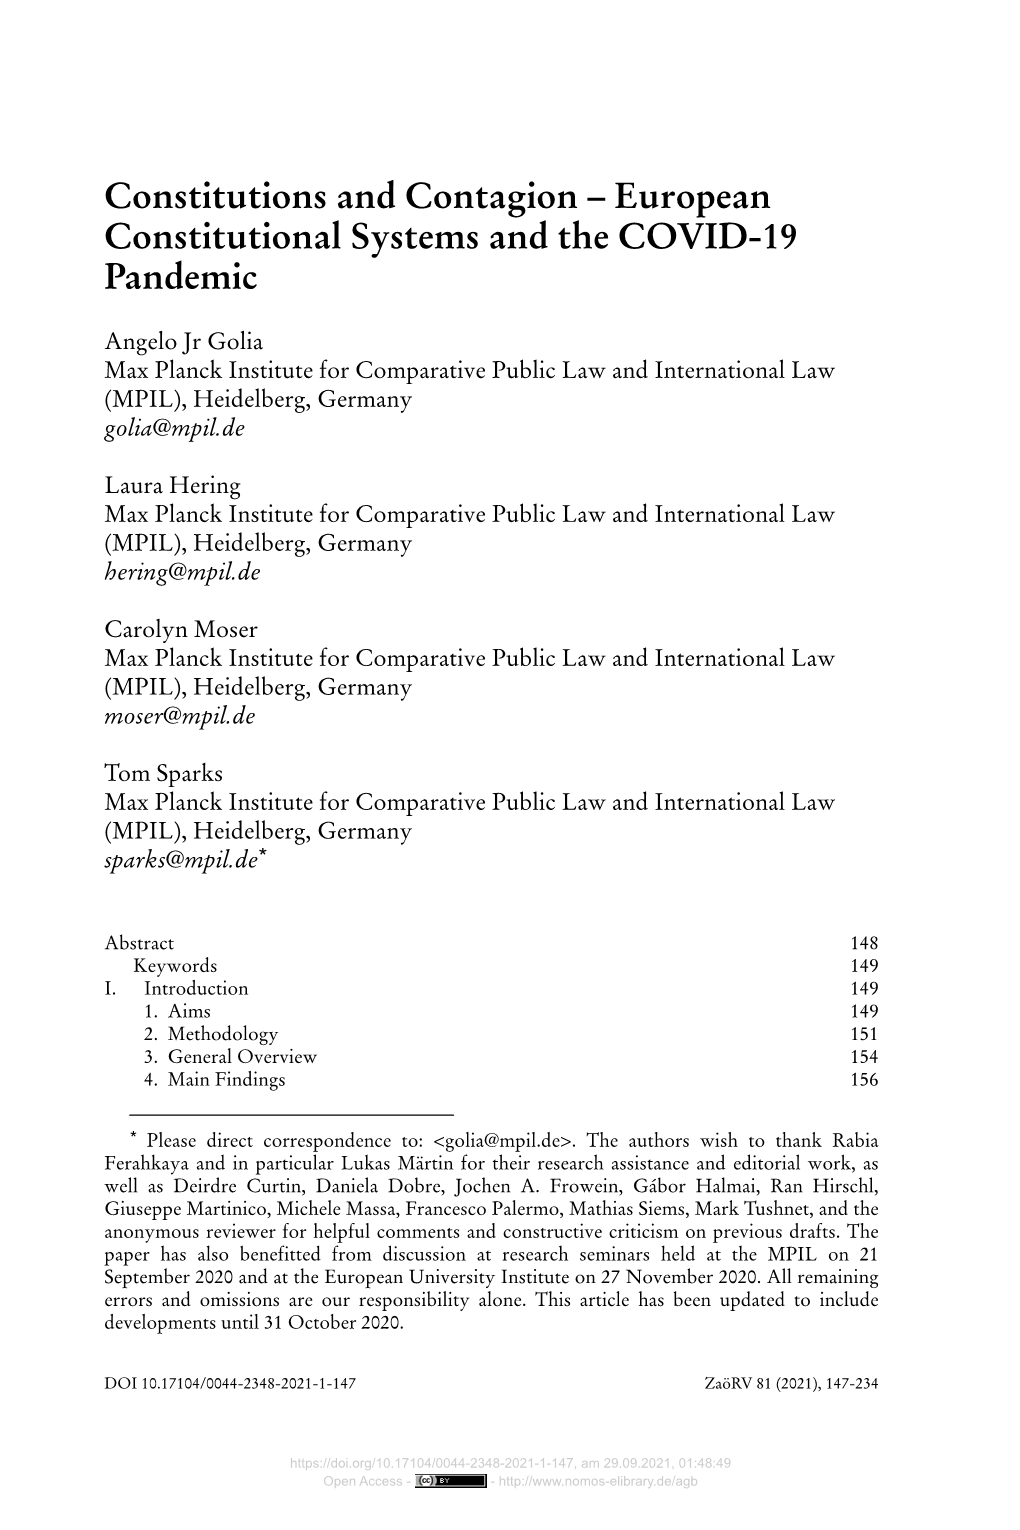 European Constitutional Systems and the COVID-19 Pandemic